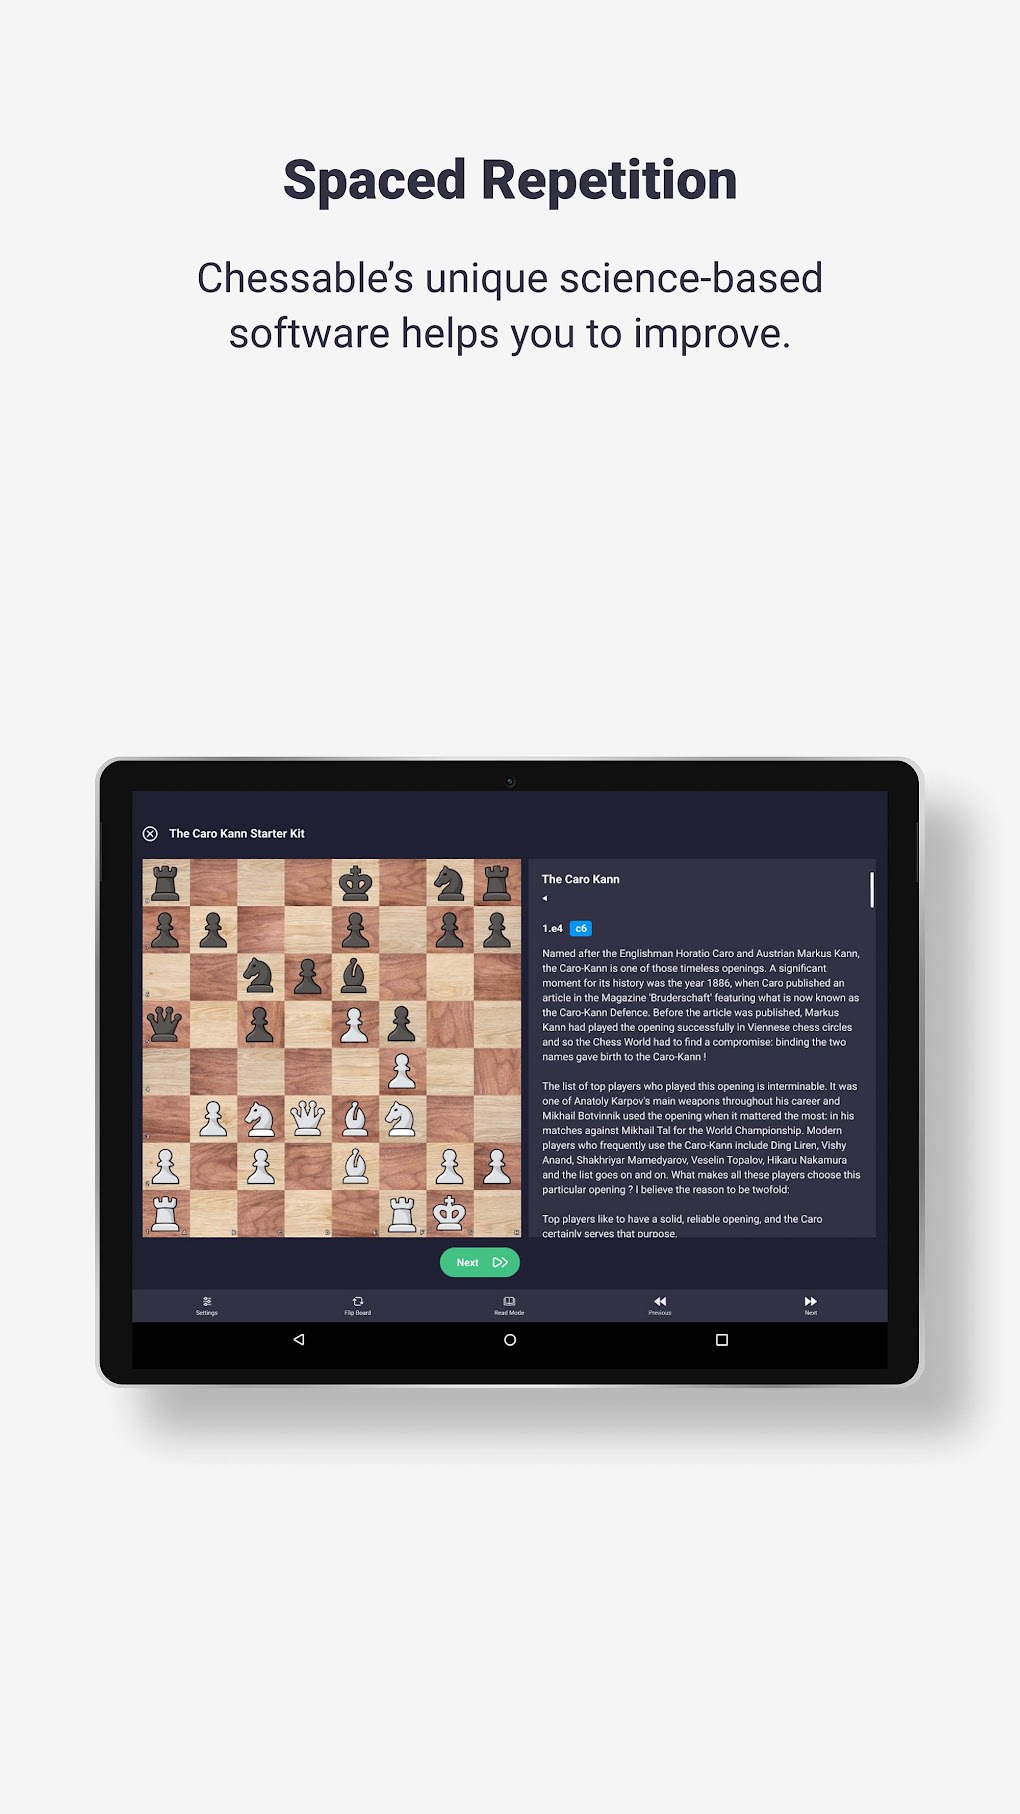 How long does the free chessable PRO membership last? - Chess